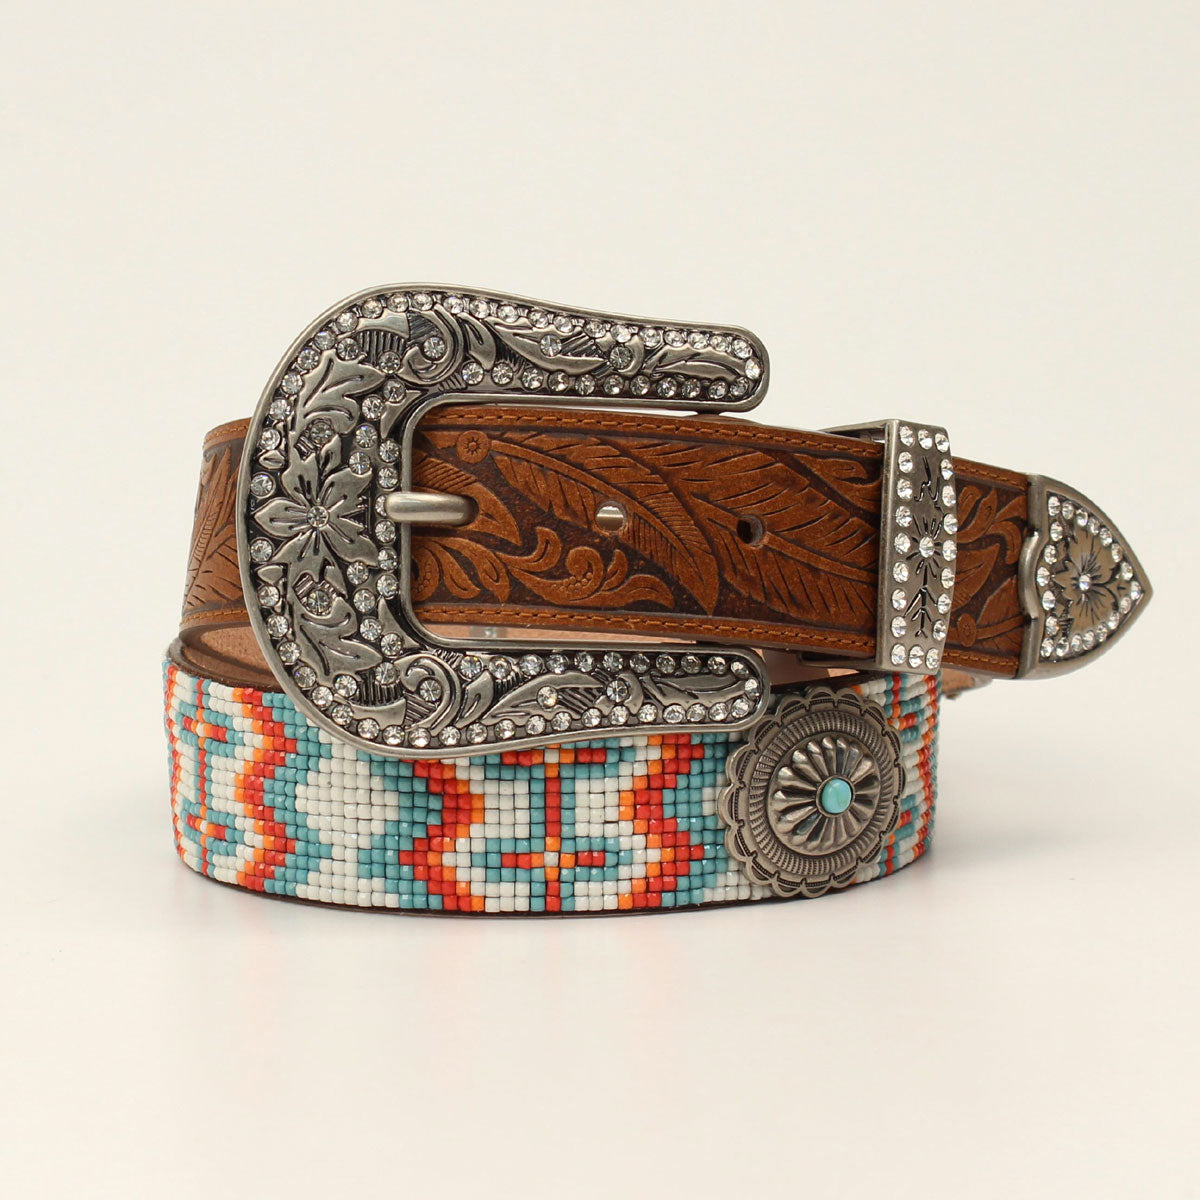 ANGEL RANCH LADIES BELT 1 1/2 TOOLED TABS BEADED OVERLAY ROUND CONCHOS MULTICOLORED